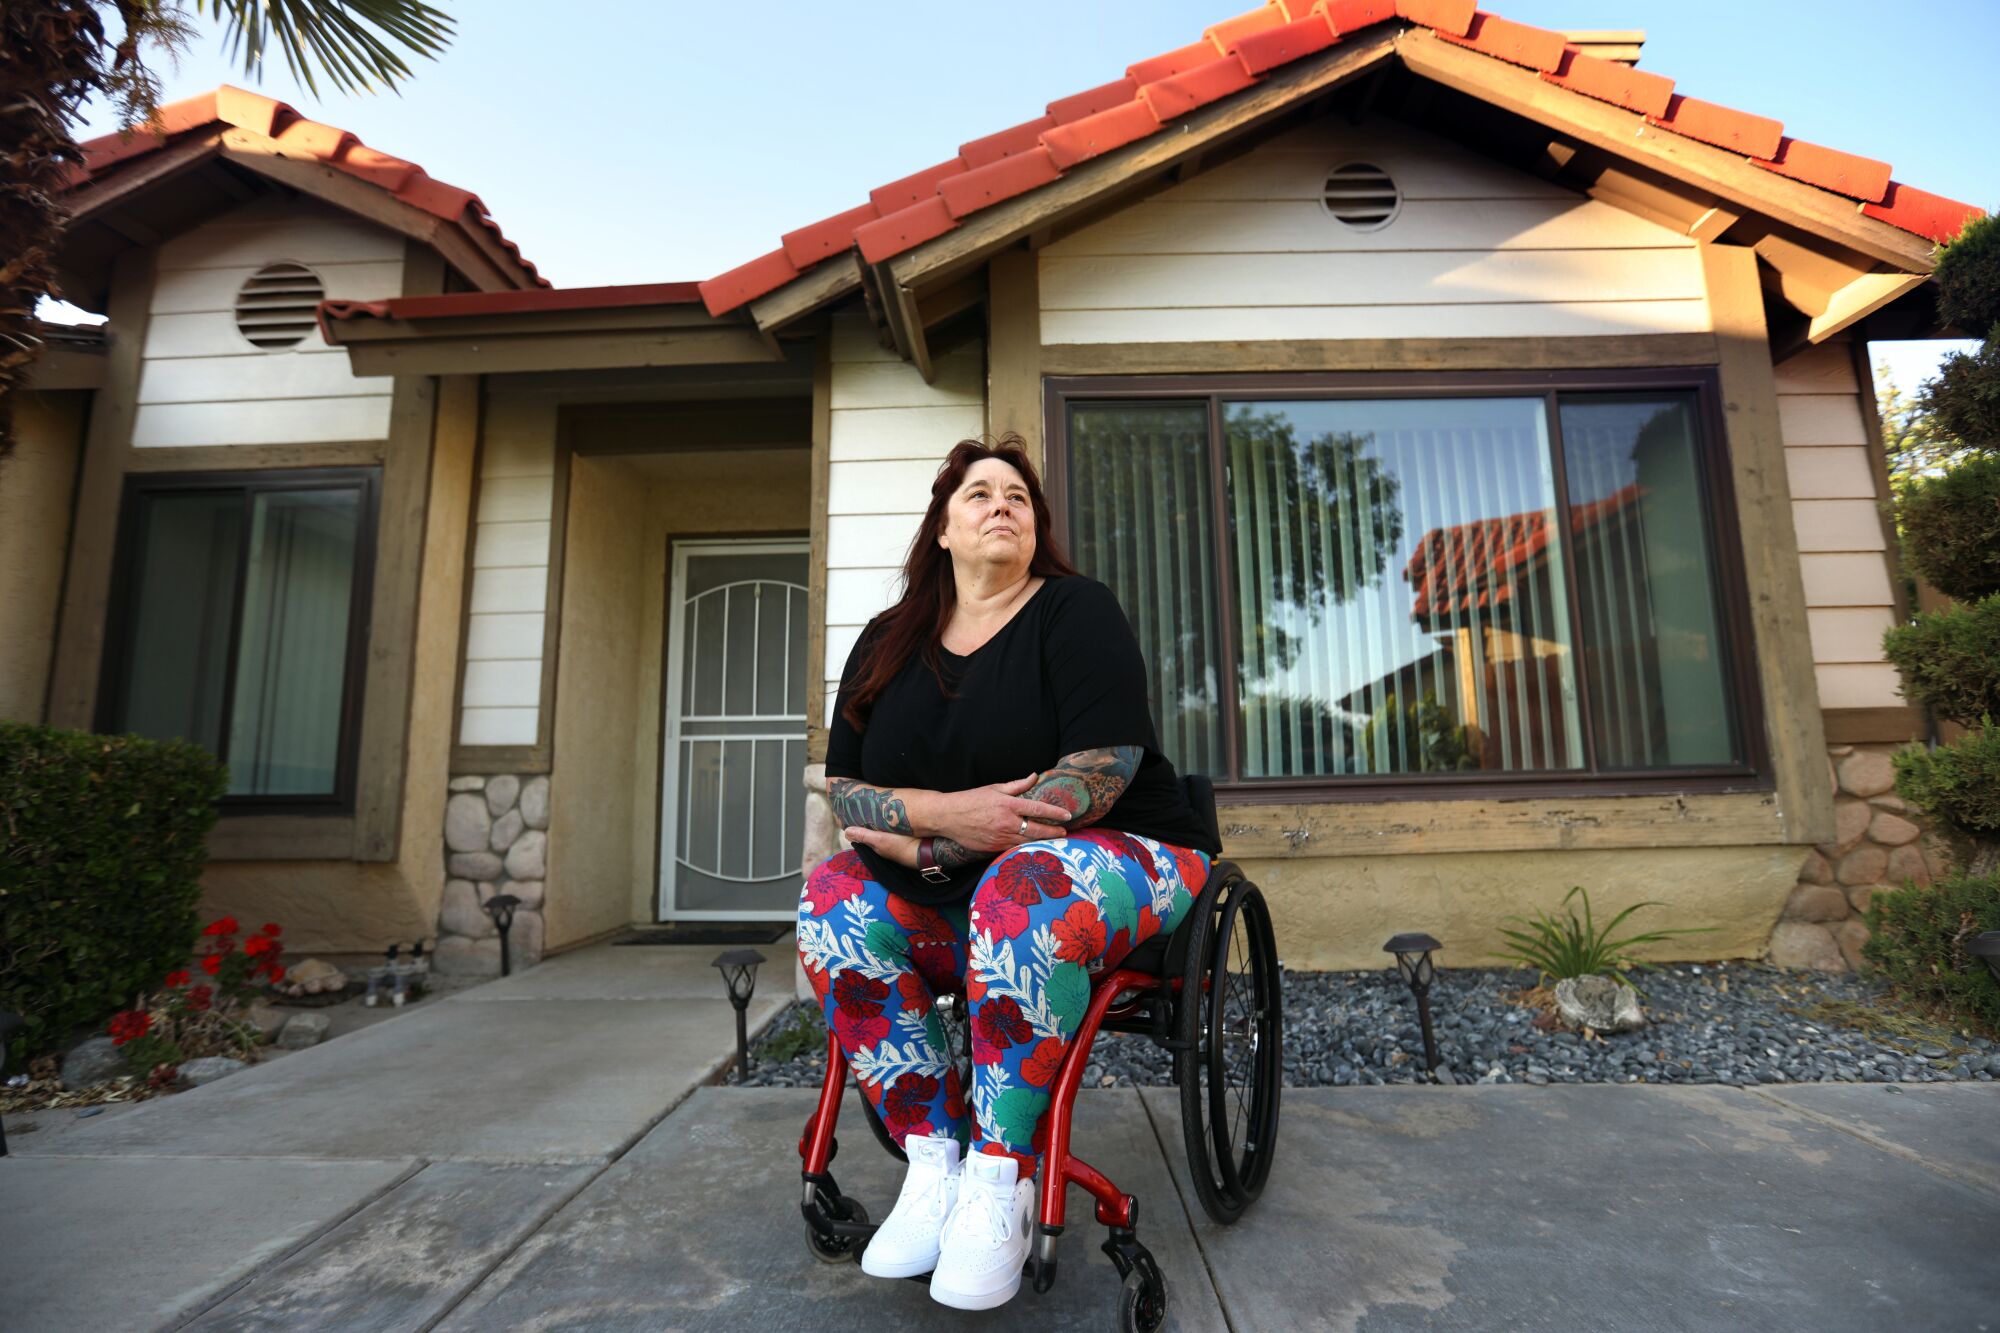 A woman sits in a wheelchair outside a house